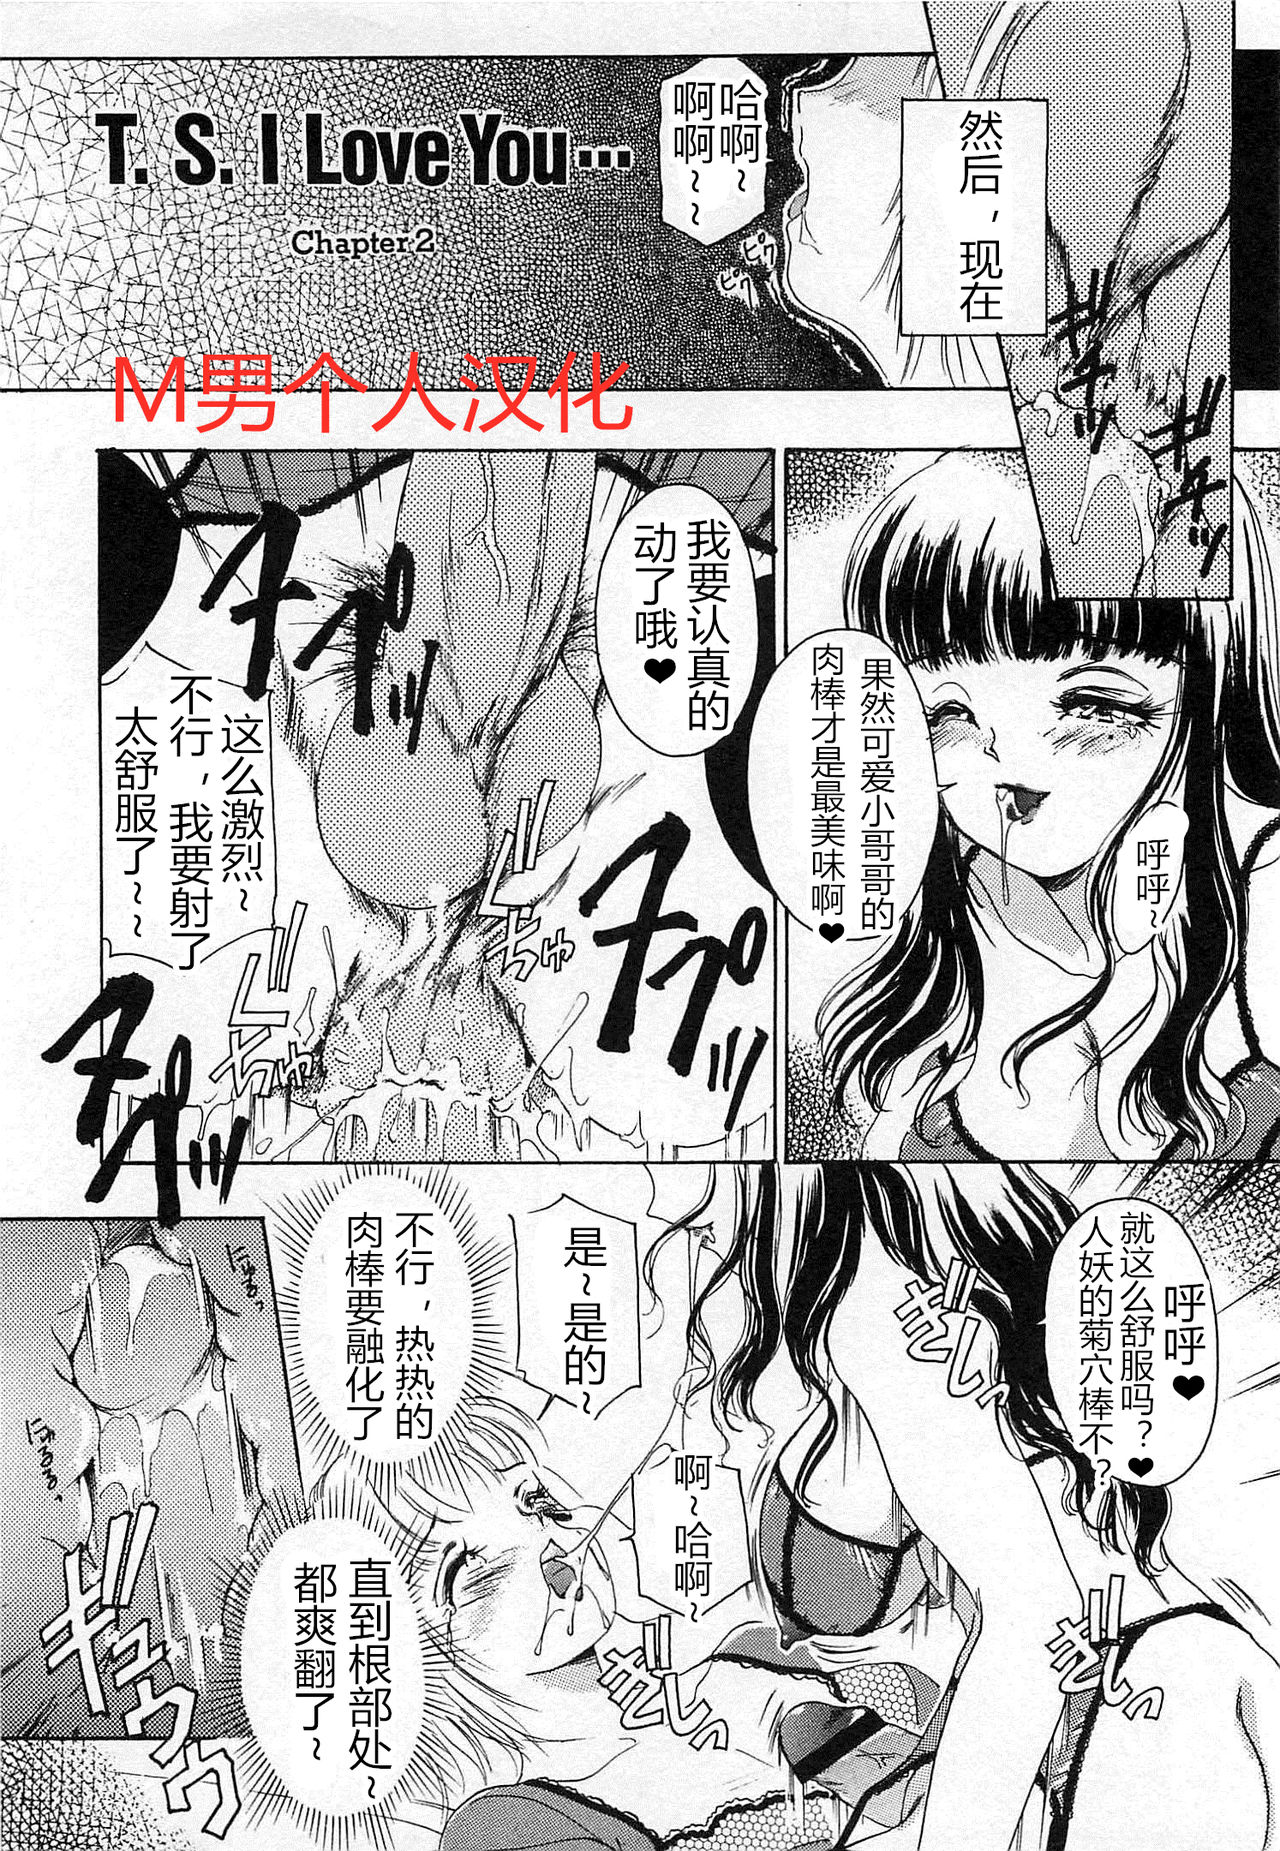 [The Amanoja9] T.S. I LOVE YOU chapter 02 [Chinese] [M男个人汉化] [The Amanoja9] T.S. I LOVE YOU chapter 02 [中国翻訳]